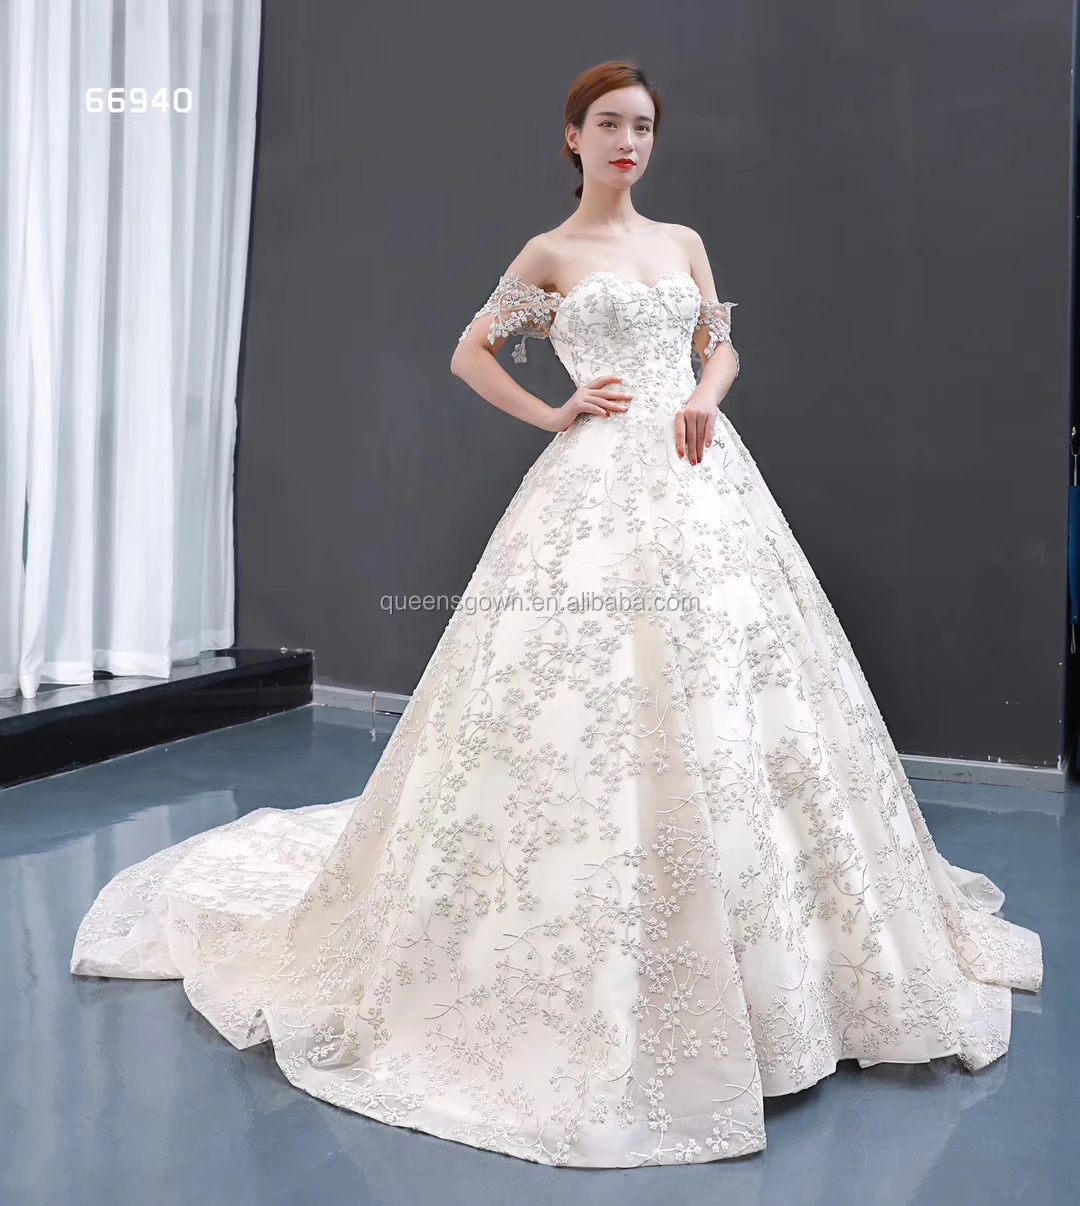 Andy Chang on LinkedIn: Long Lace Suspender Long Wedding Dress